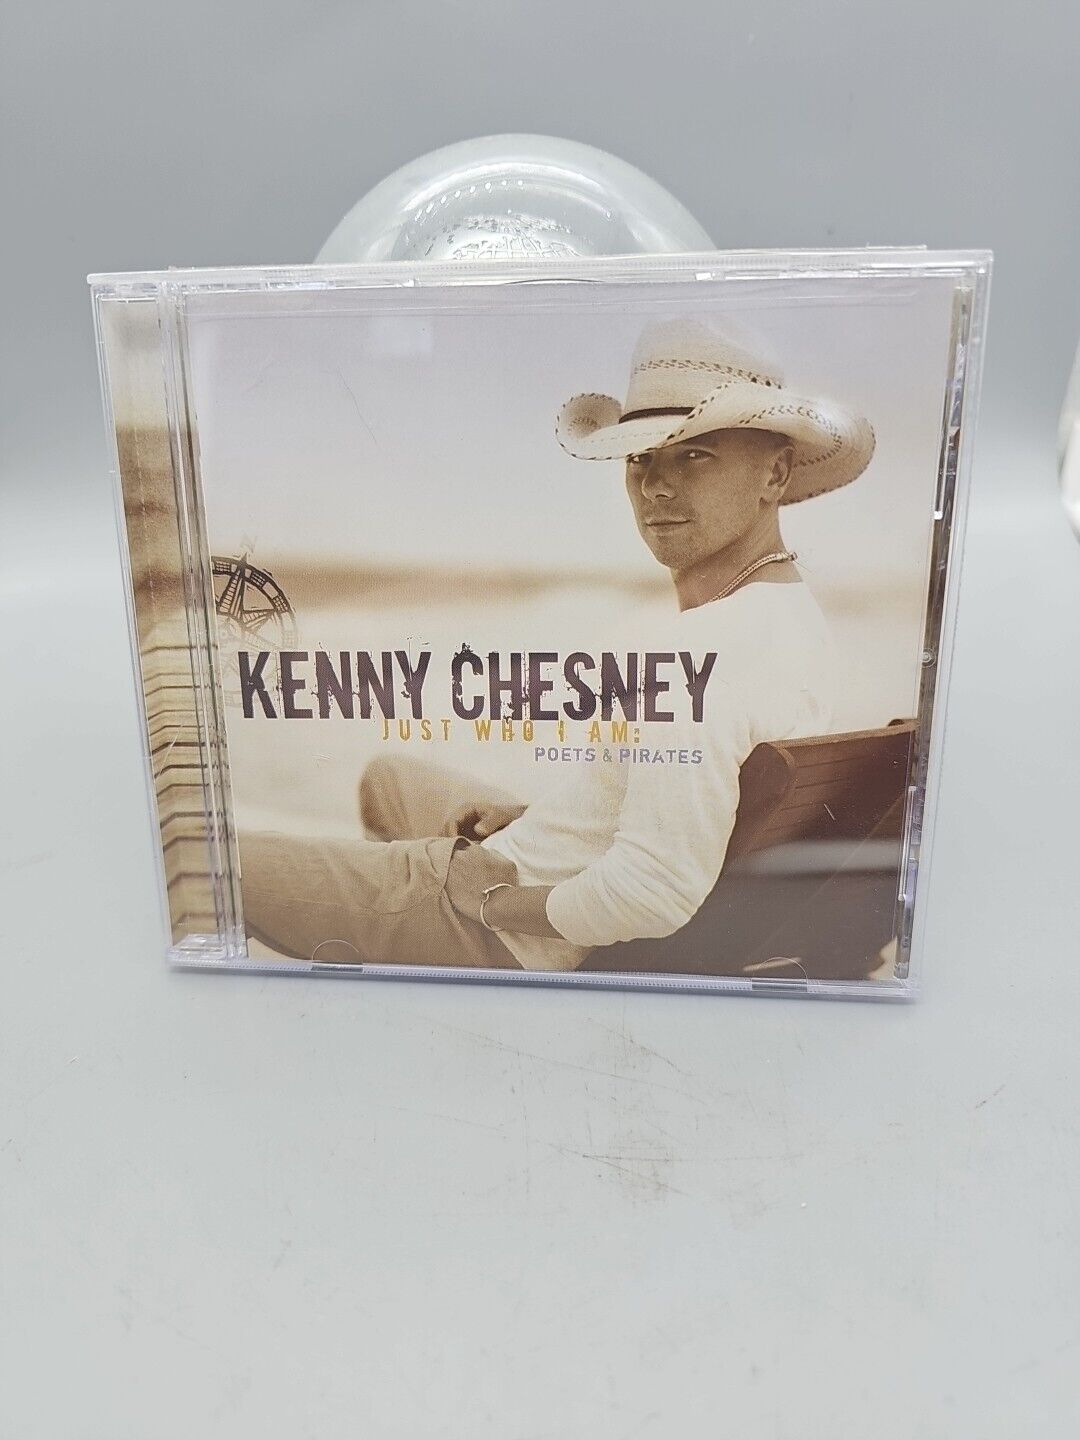 Kenny Chesney  -Just Who I am Poets and Pirates  (CD)